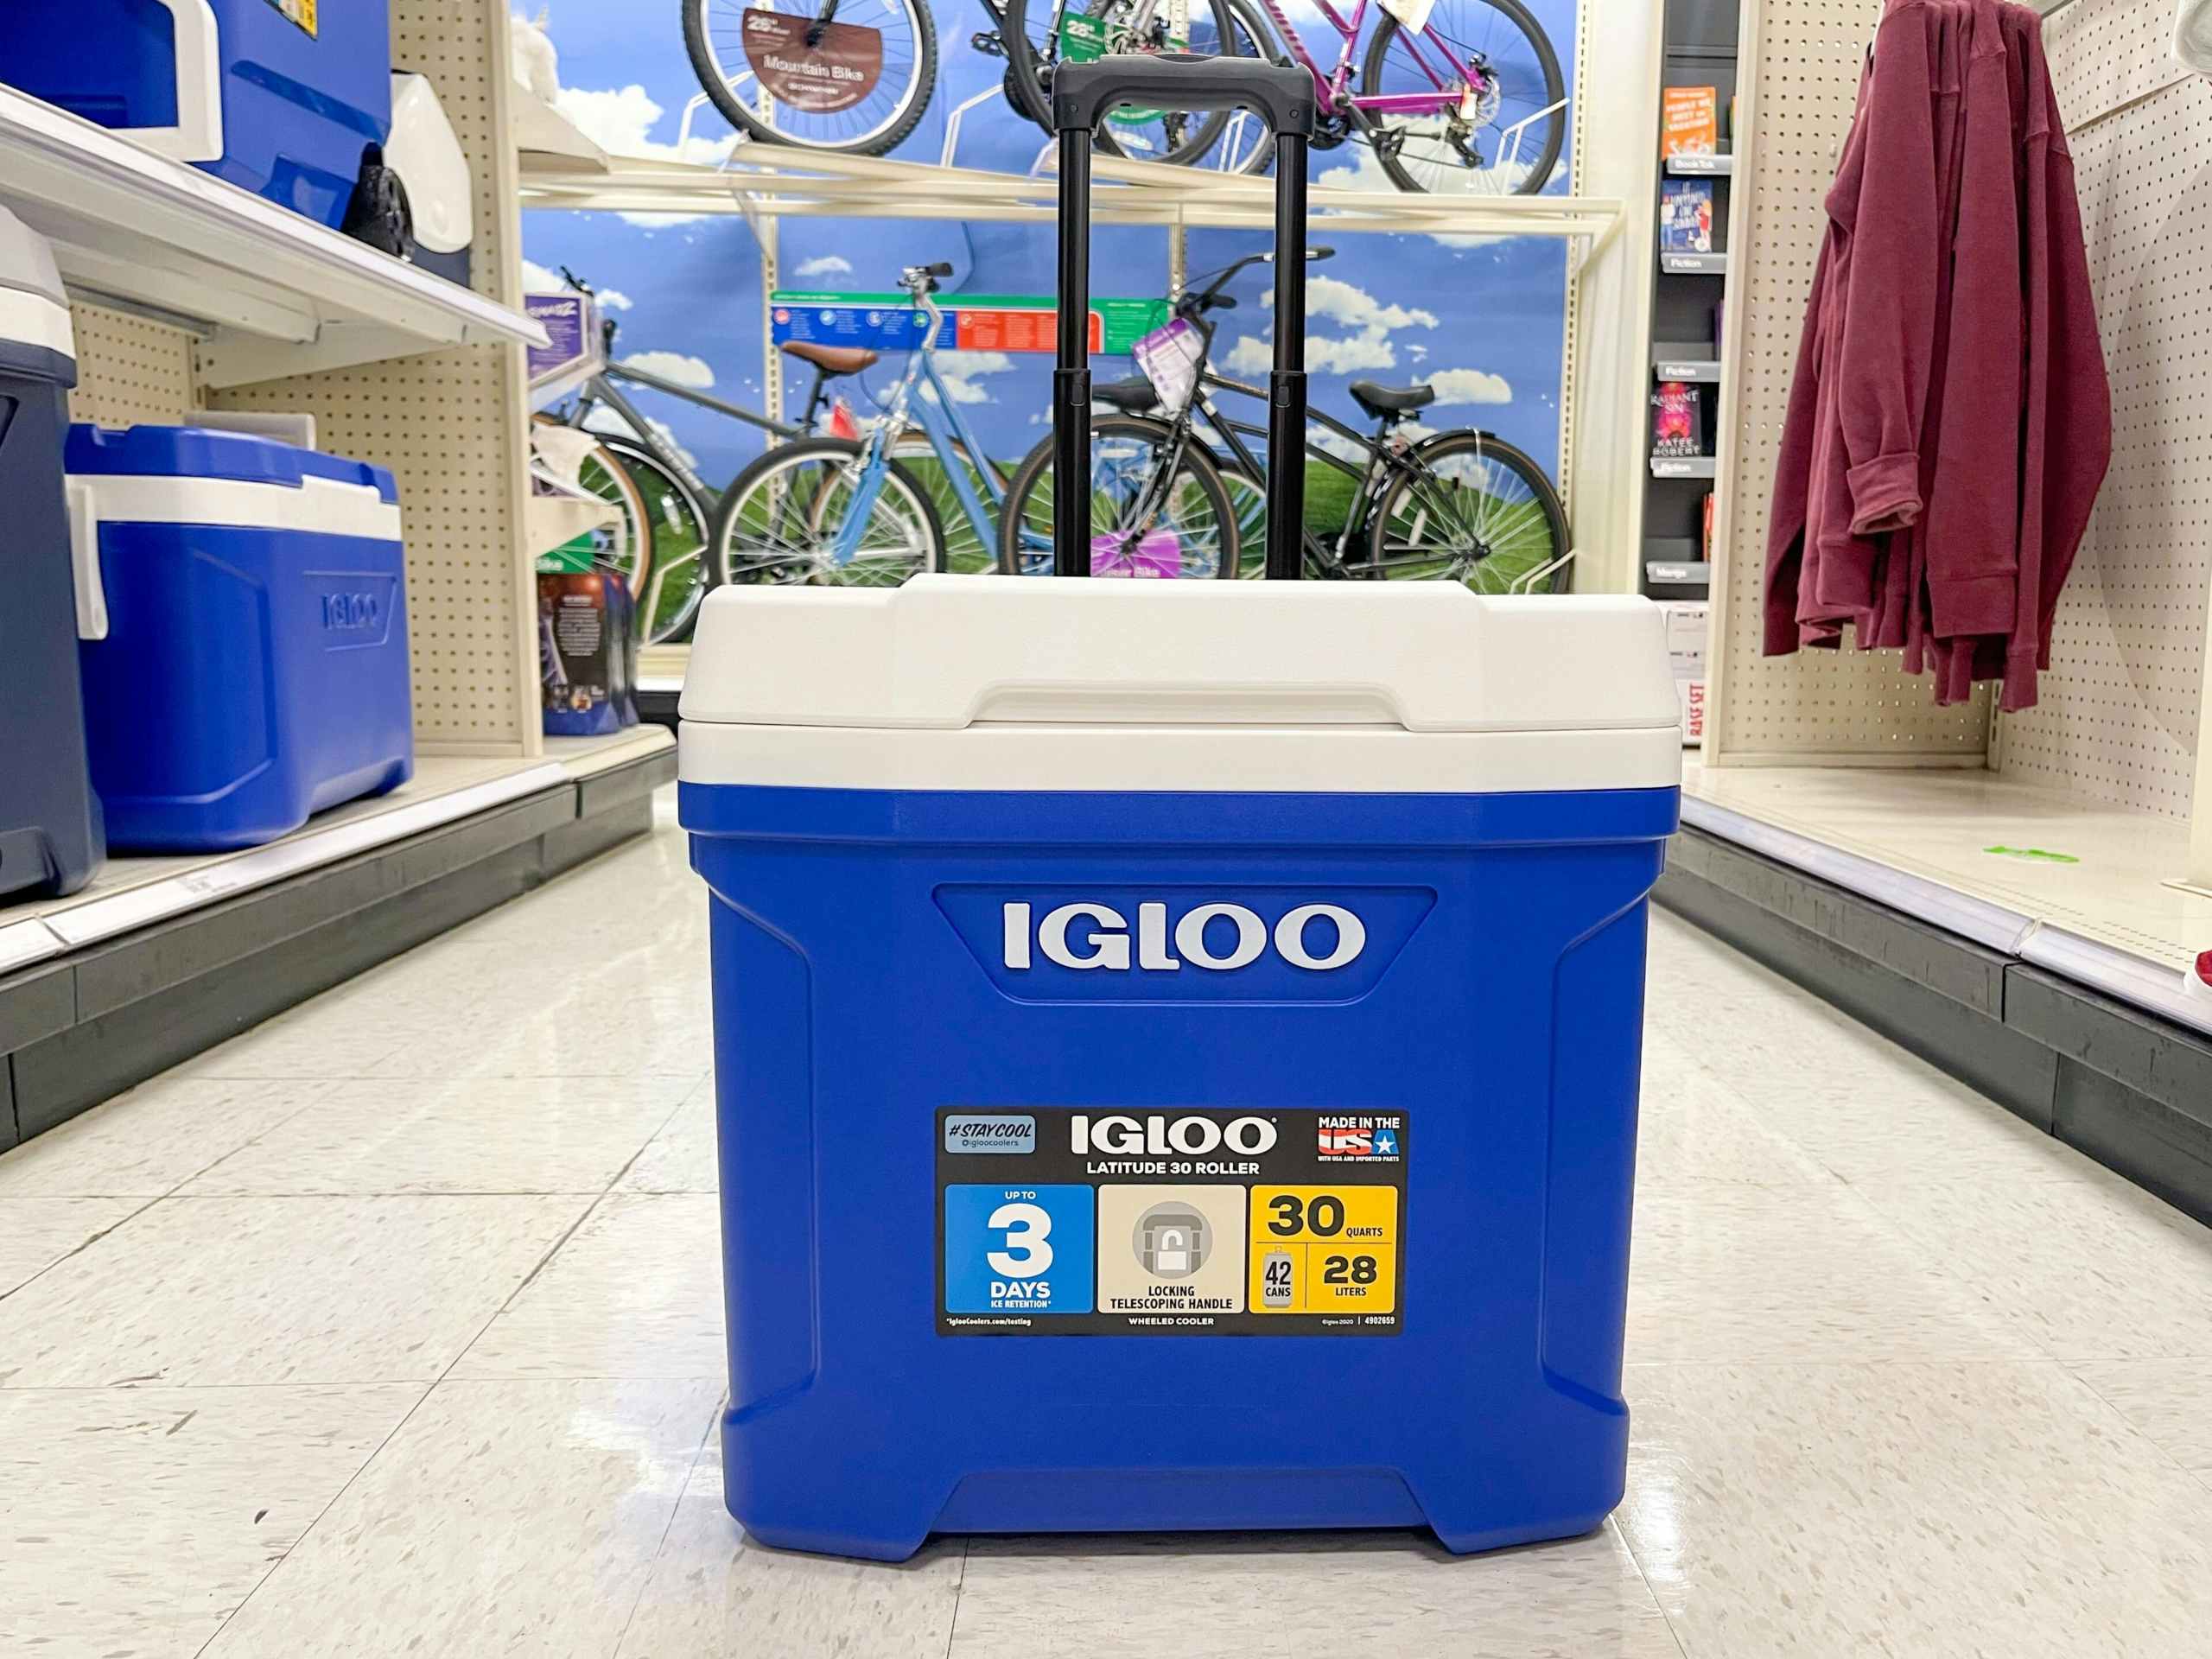 An Igloo cooler sitting in the middle of a store aisle.